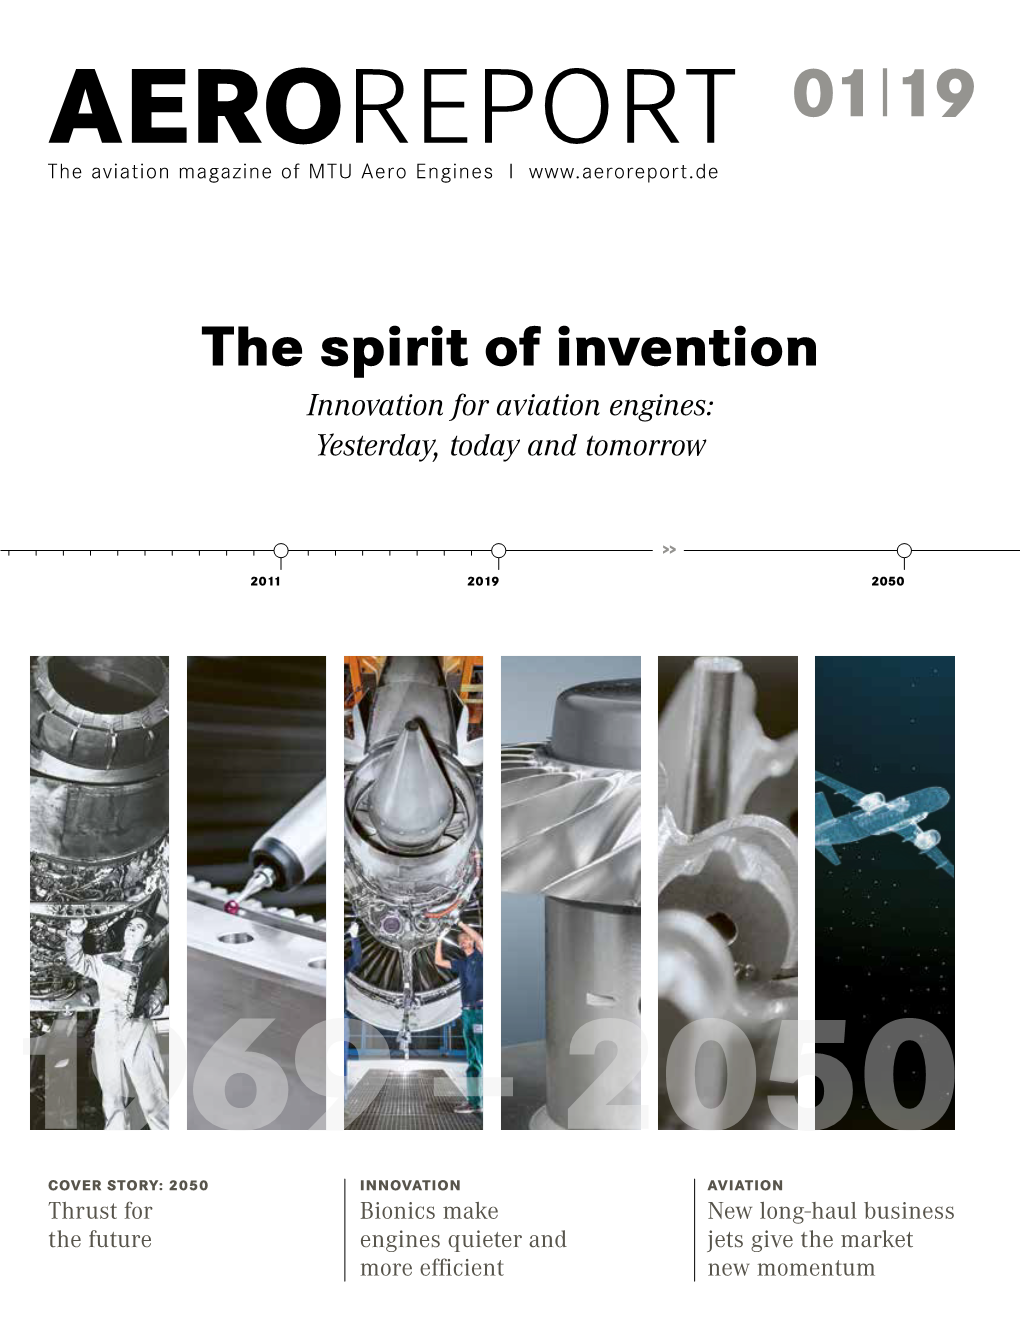 Innovation for Aviation Engines: Yesterday, Today and Tomorrow